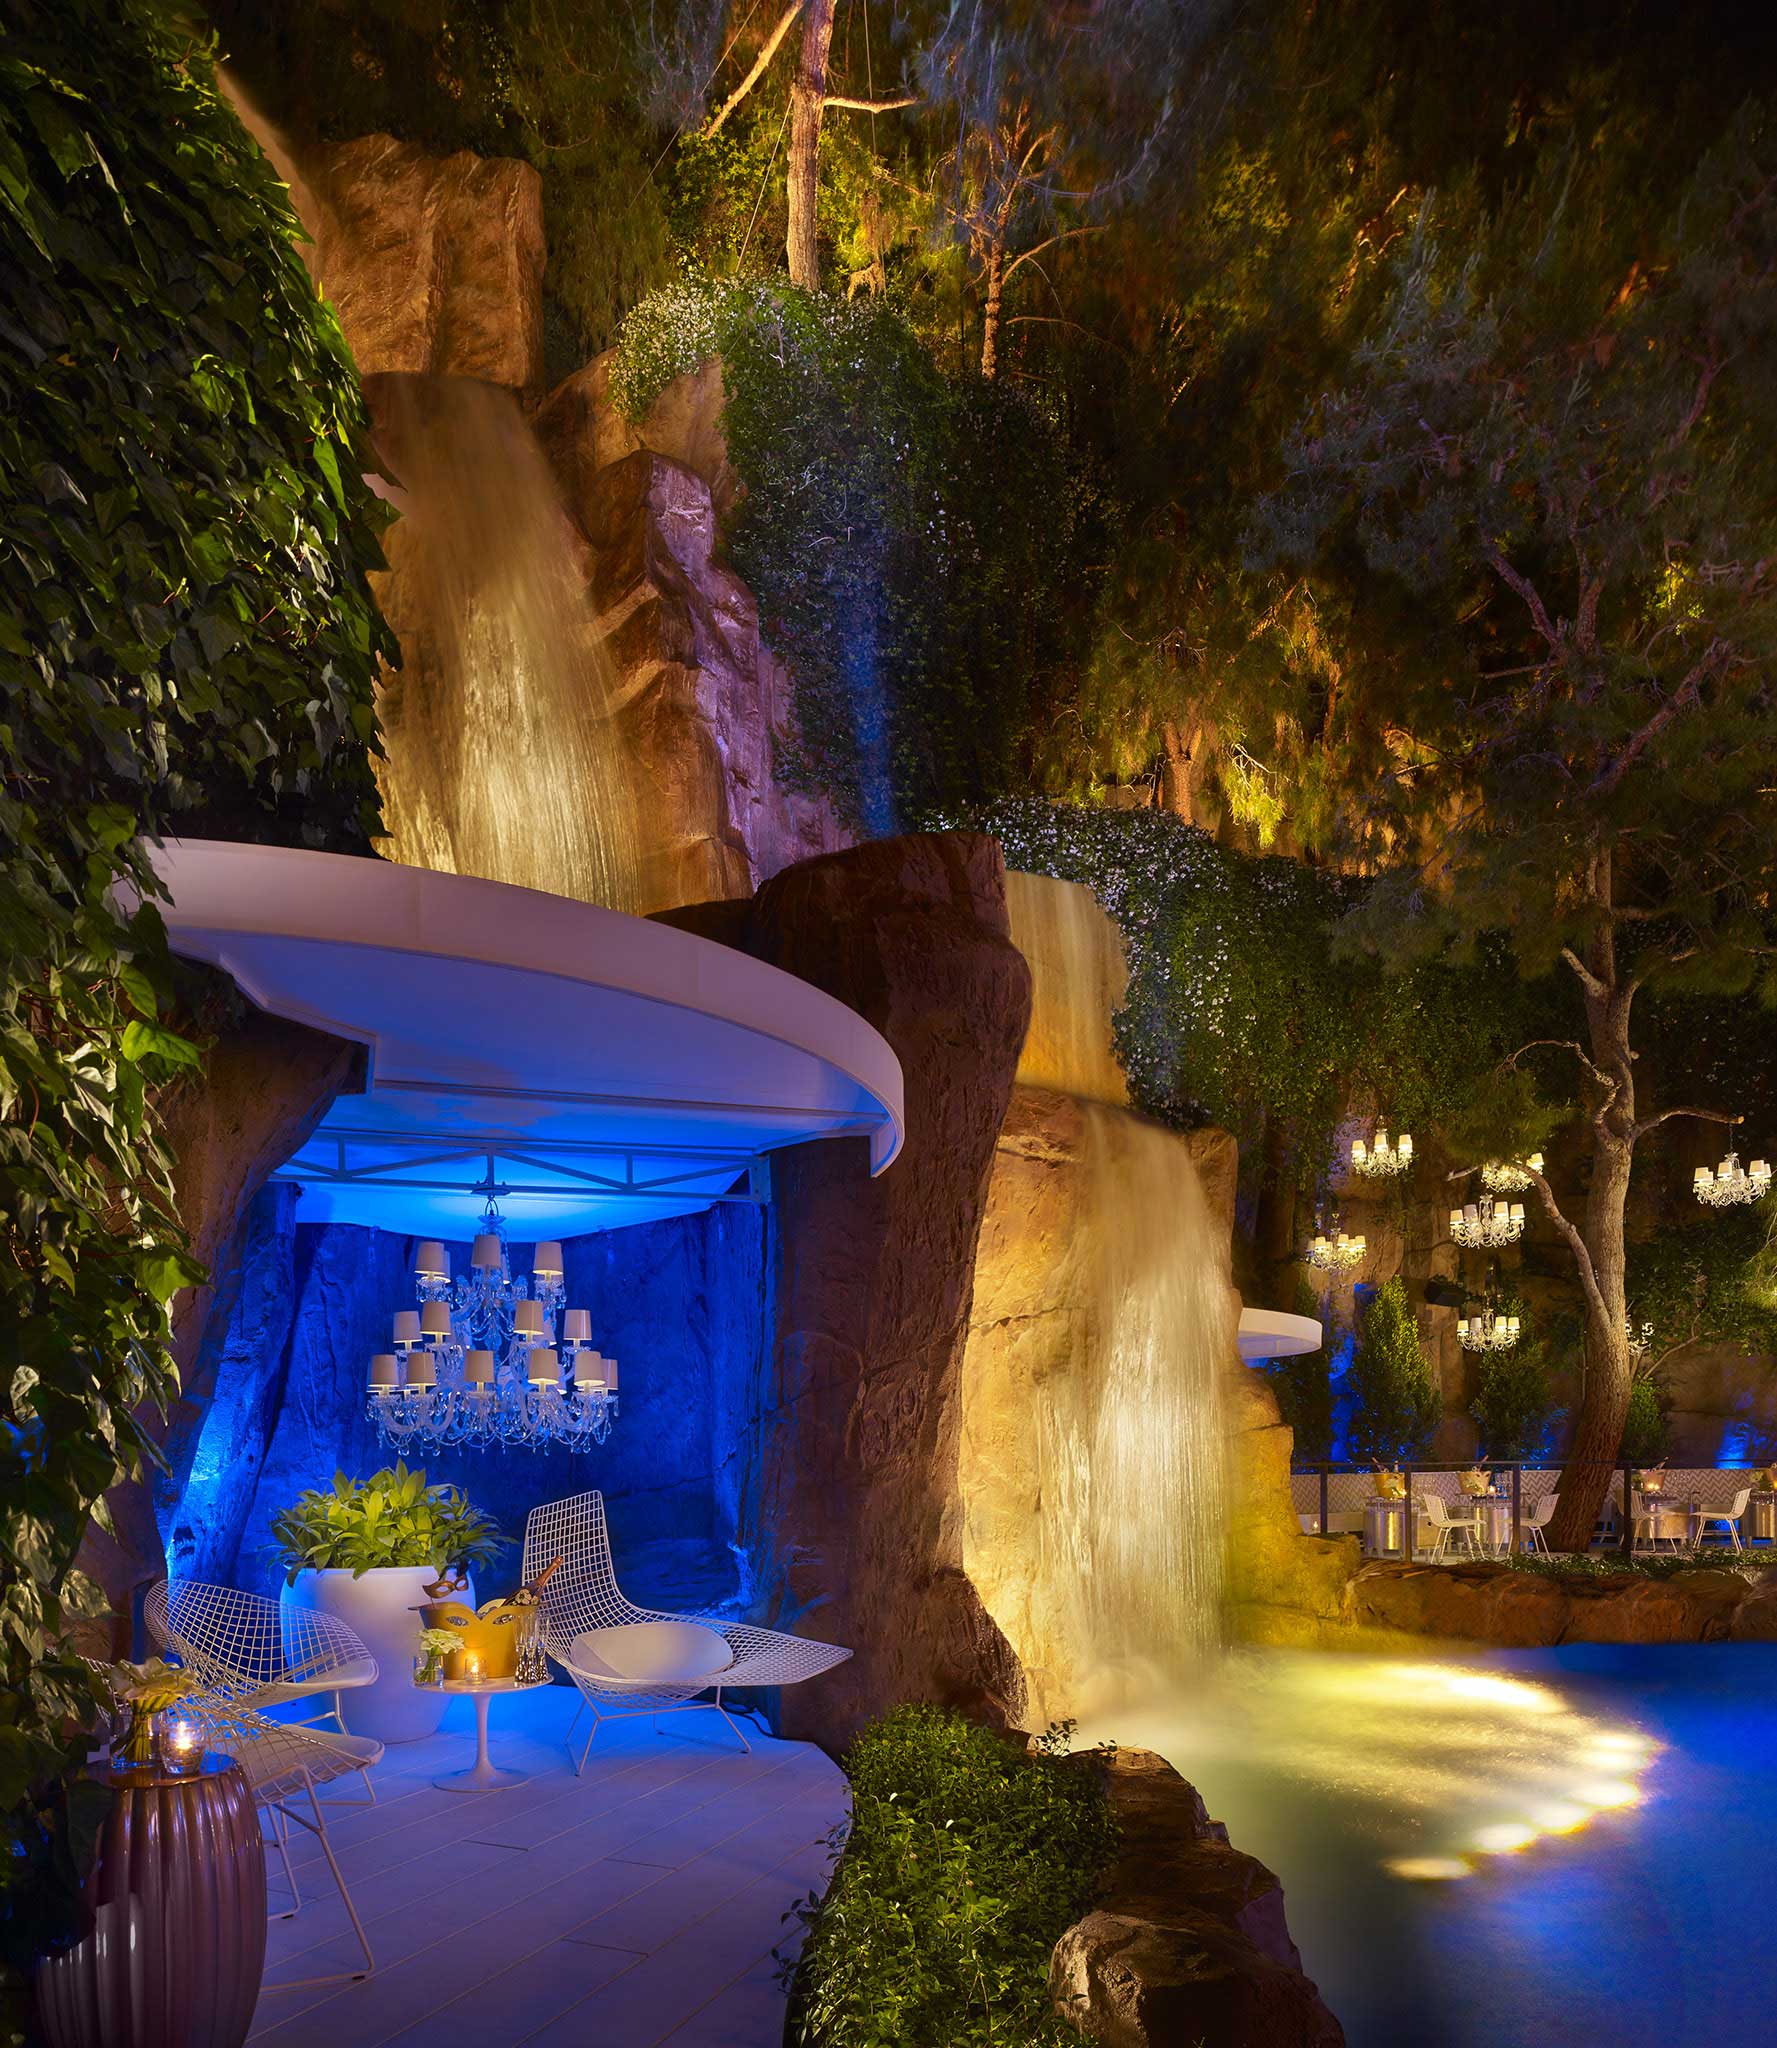 A stylish nook featuring sculptural Harry Bertoia chairs on the patio at Intrigue Nightclub in Wynn Las Vegas (photo credit: Barbara Kraft)